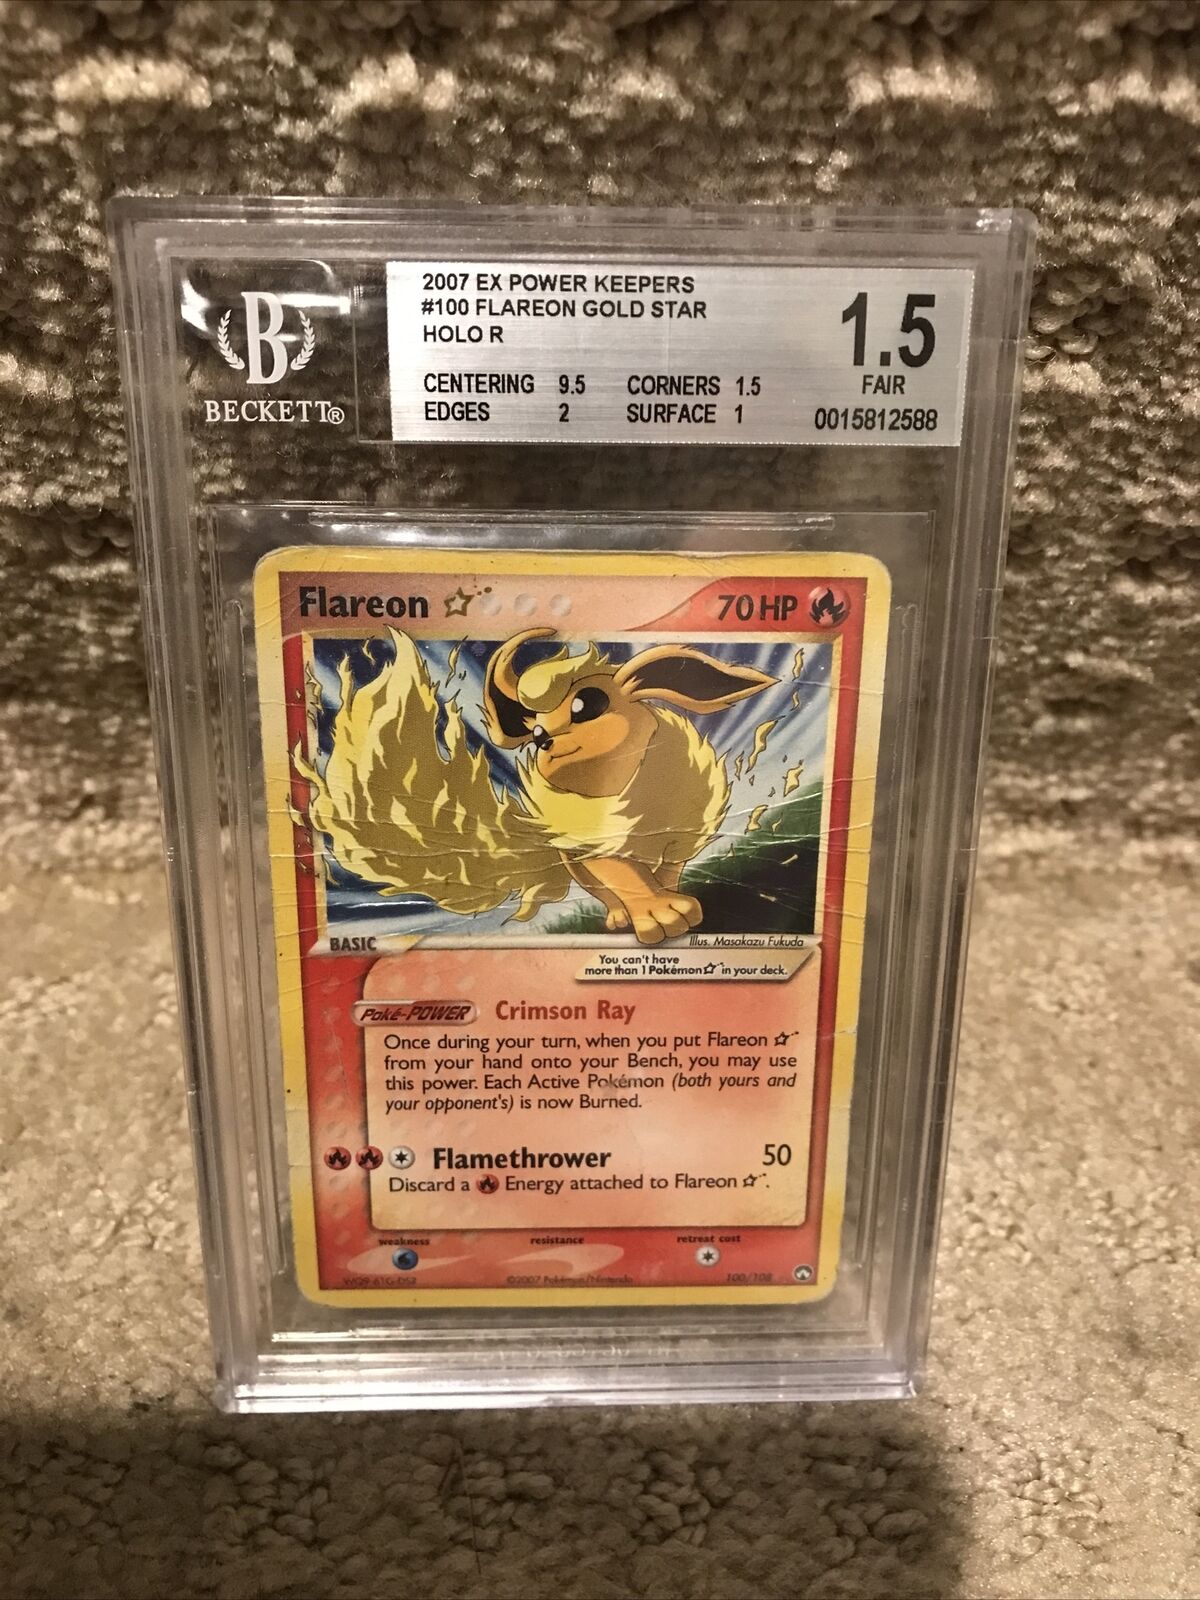 2007 Pokemon EX Power Keepers #100 Flareon Gold Star Holo BGS 1.5 w/ 9.5